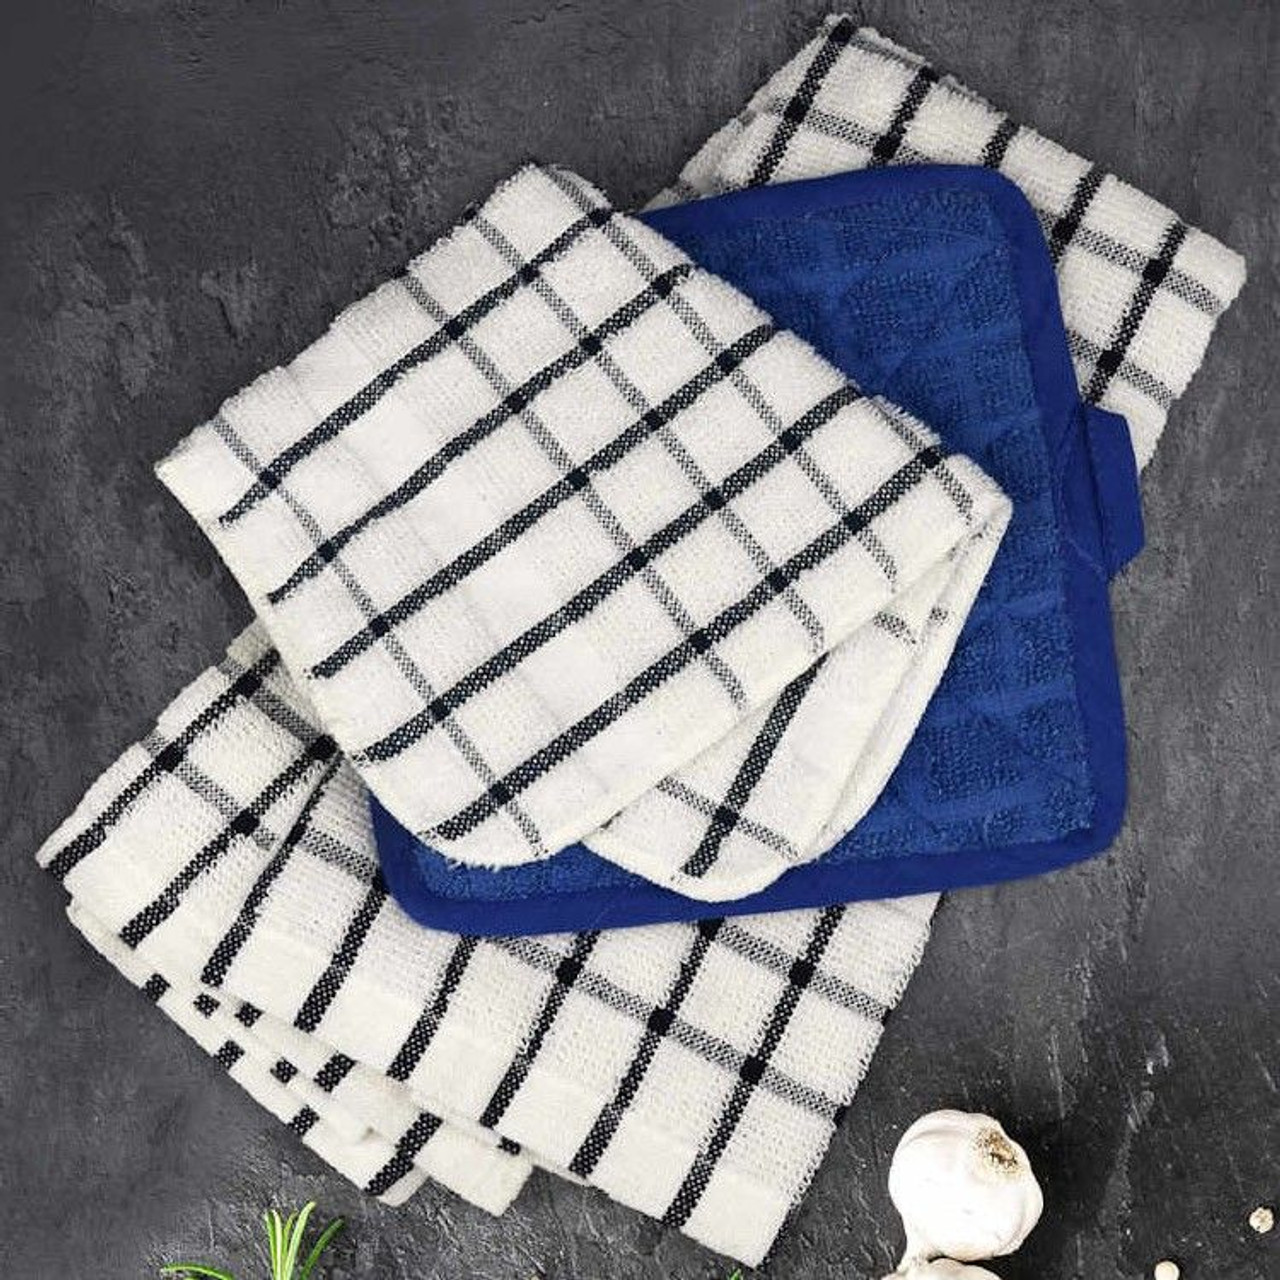 https://cdn11.bigcommerce.com/s-q0oajb576s/images/stencil/1280x1280/products/1103/3039/oxford-terry-kitchen-towels-15-x25-solid-colors-check-patterns-100-ring-spun-cotton-vat-dyed-14__02840.1680206880.jpg?c=1?imbypass=on